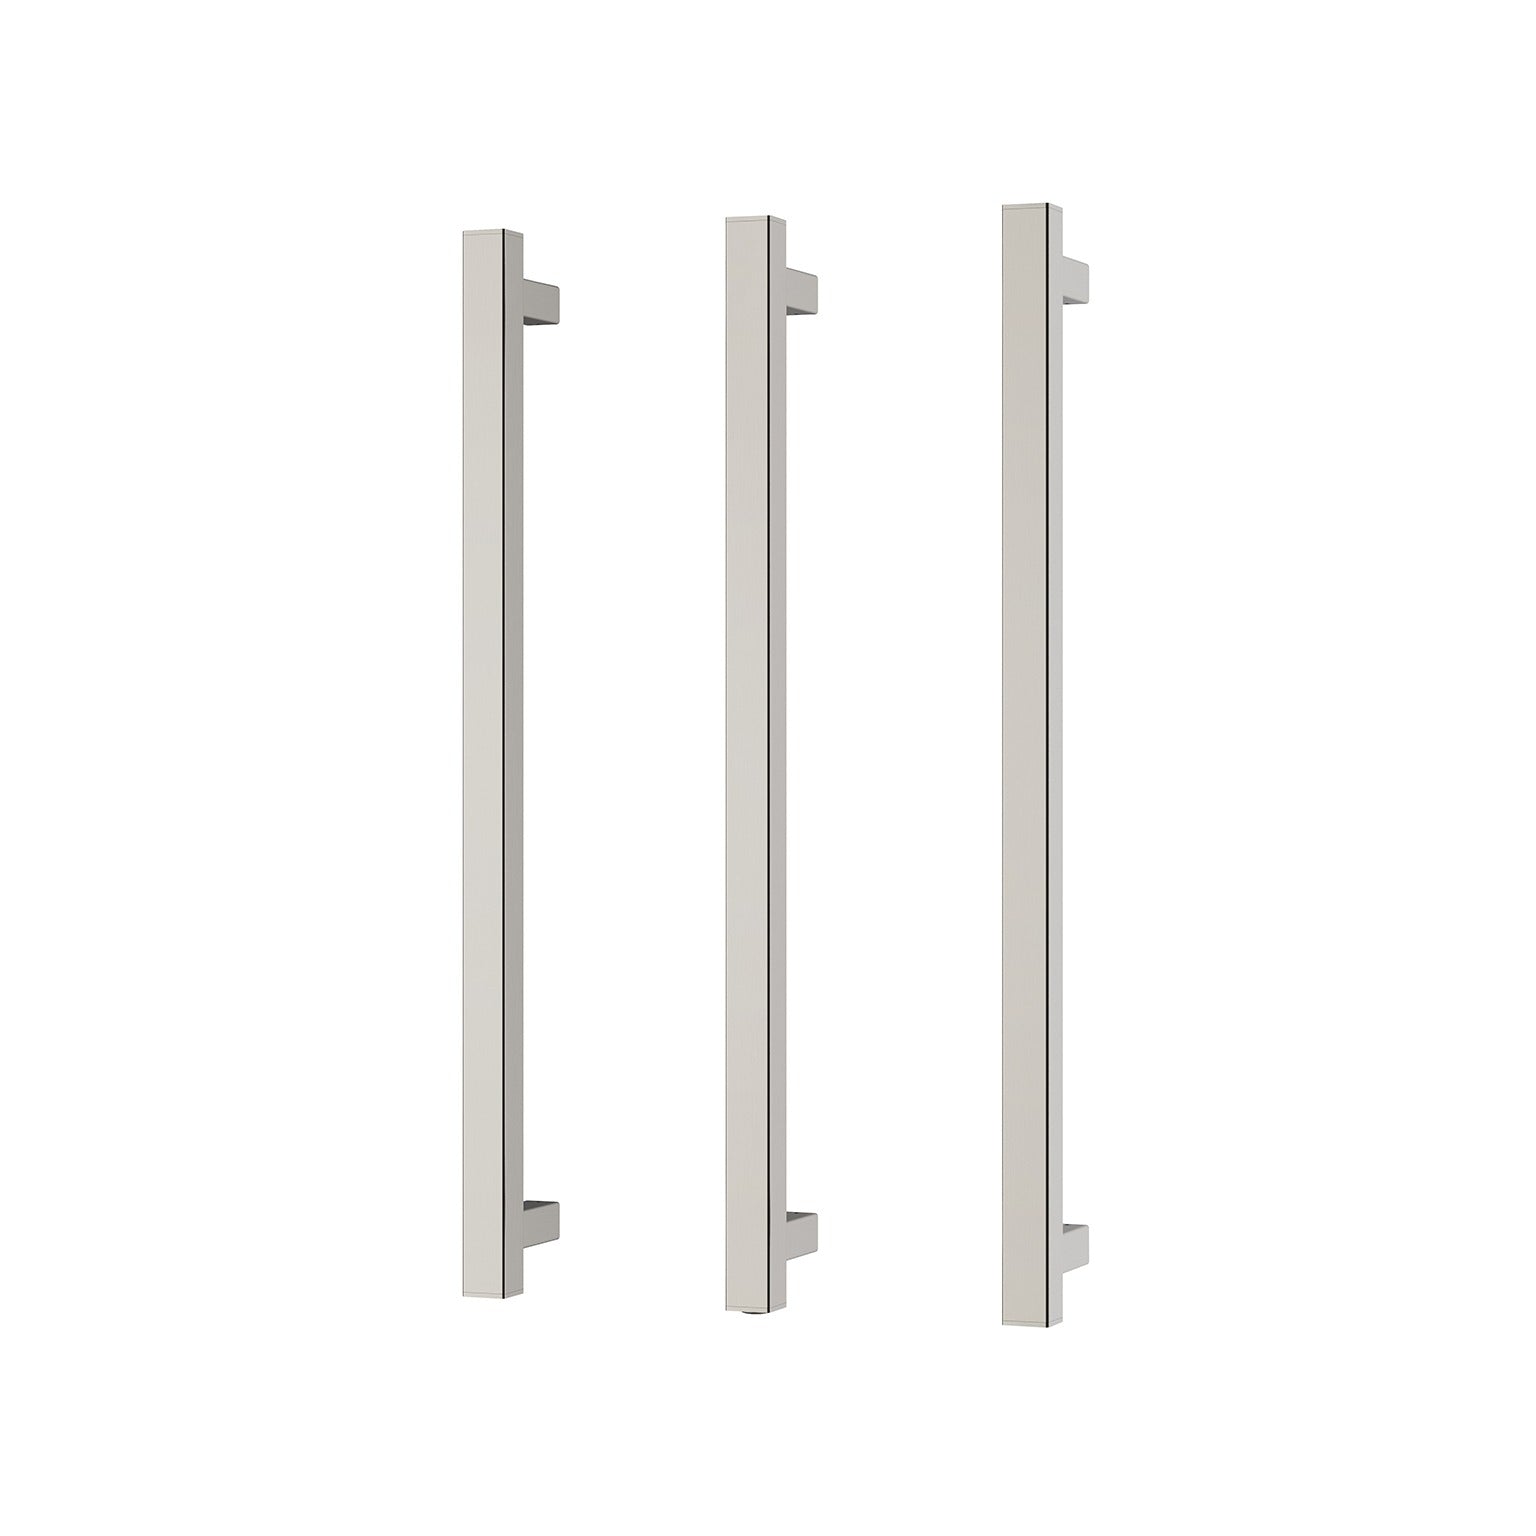 PHOENIX SQUARE TRIPLE HEATED TOWEL RAIL BRUSHED NICKEL (AVAILABLE IN 600MM AND 800MM)